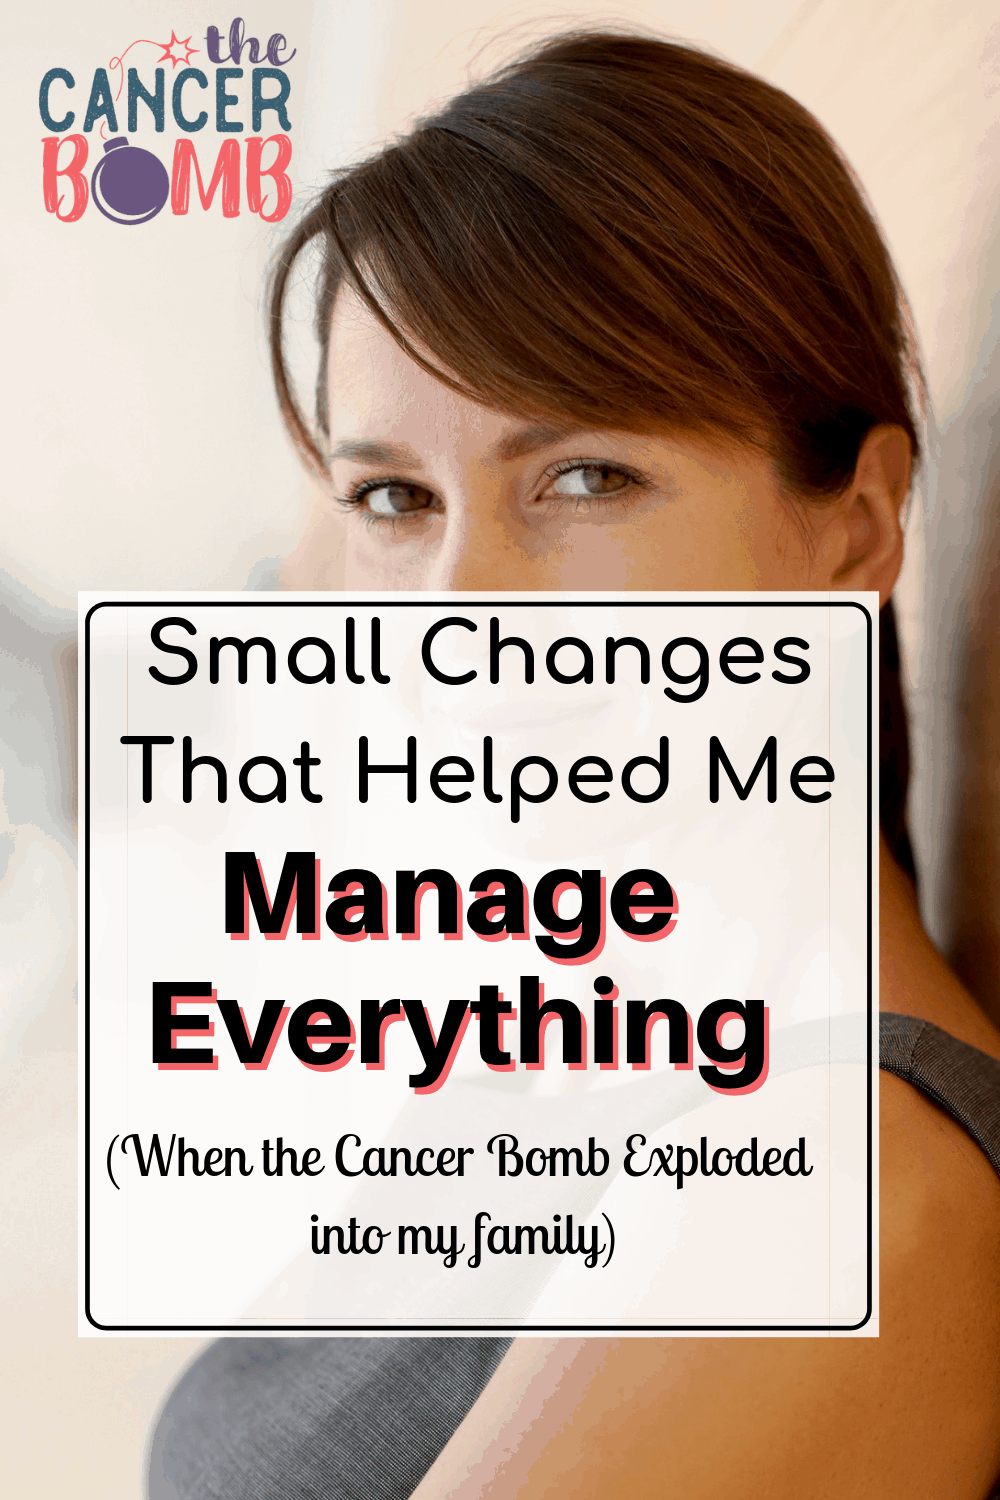 Simple changes can make a HUGE impact when you’re helping a loved one battle cancer. It’s the little things that matter when you feel like you have to be Game ON every second. These tips had the biggest impact when we were struggling to manage everything. Getting this stuff under control resulted in more motivation to keep fighting… #fuckcancer #manageyourlifetoo #praying for a cure #smallchangesmakeabigdifference